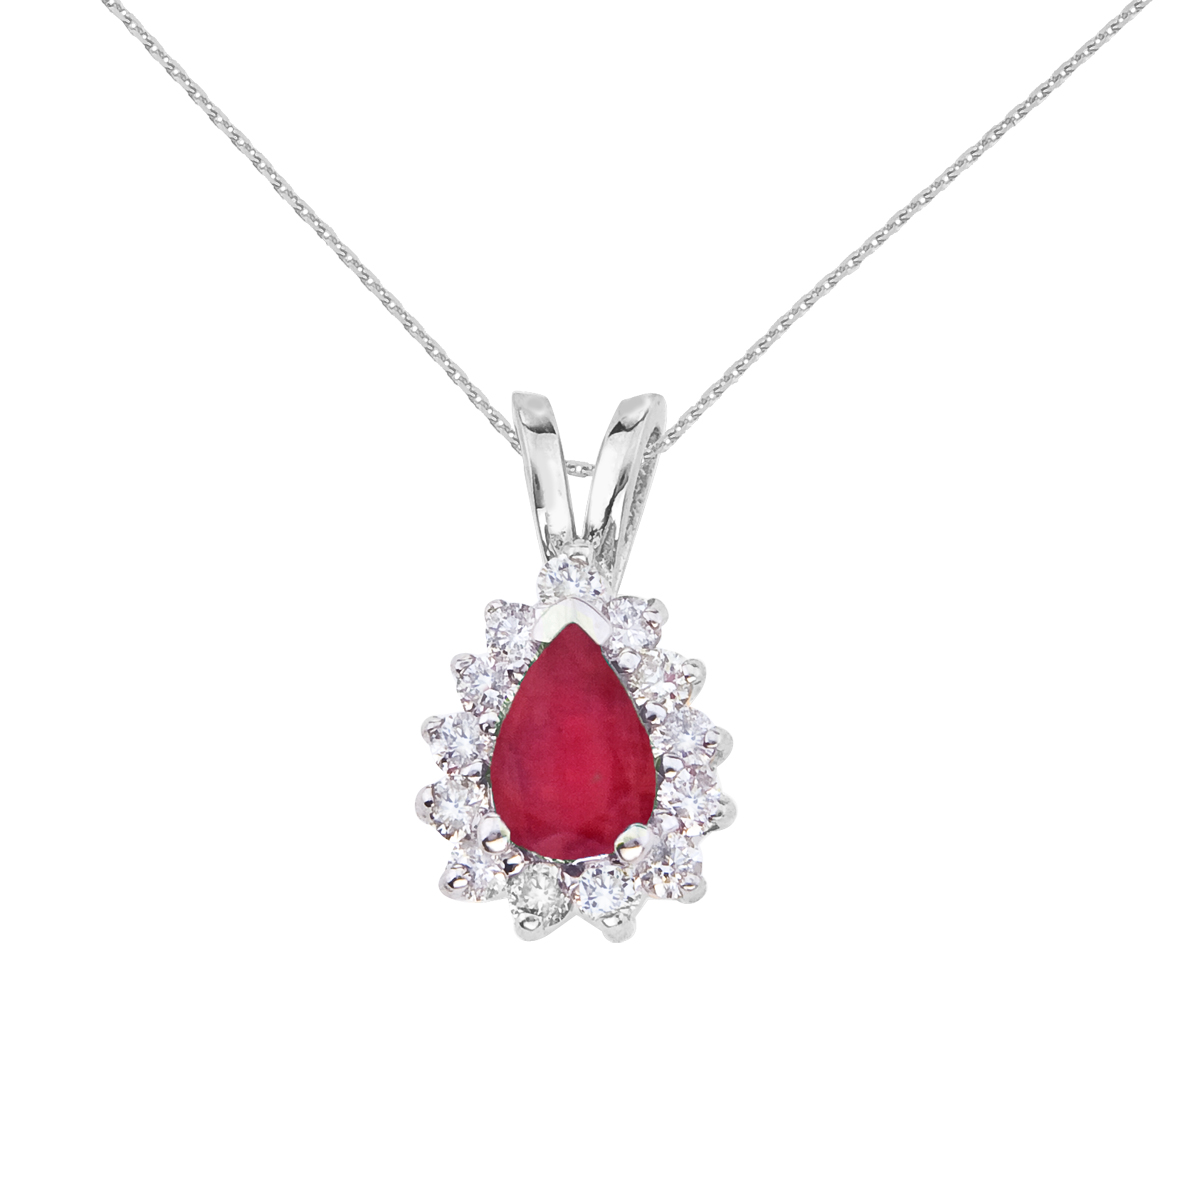 JCX2703: 6x4 mm oval natural ruby pendant accented with bright diamonds set in 14k white gold.